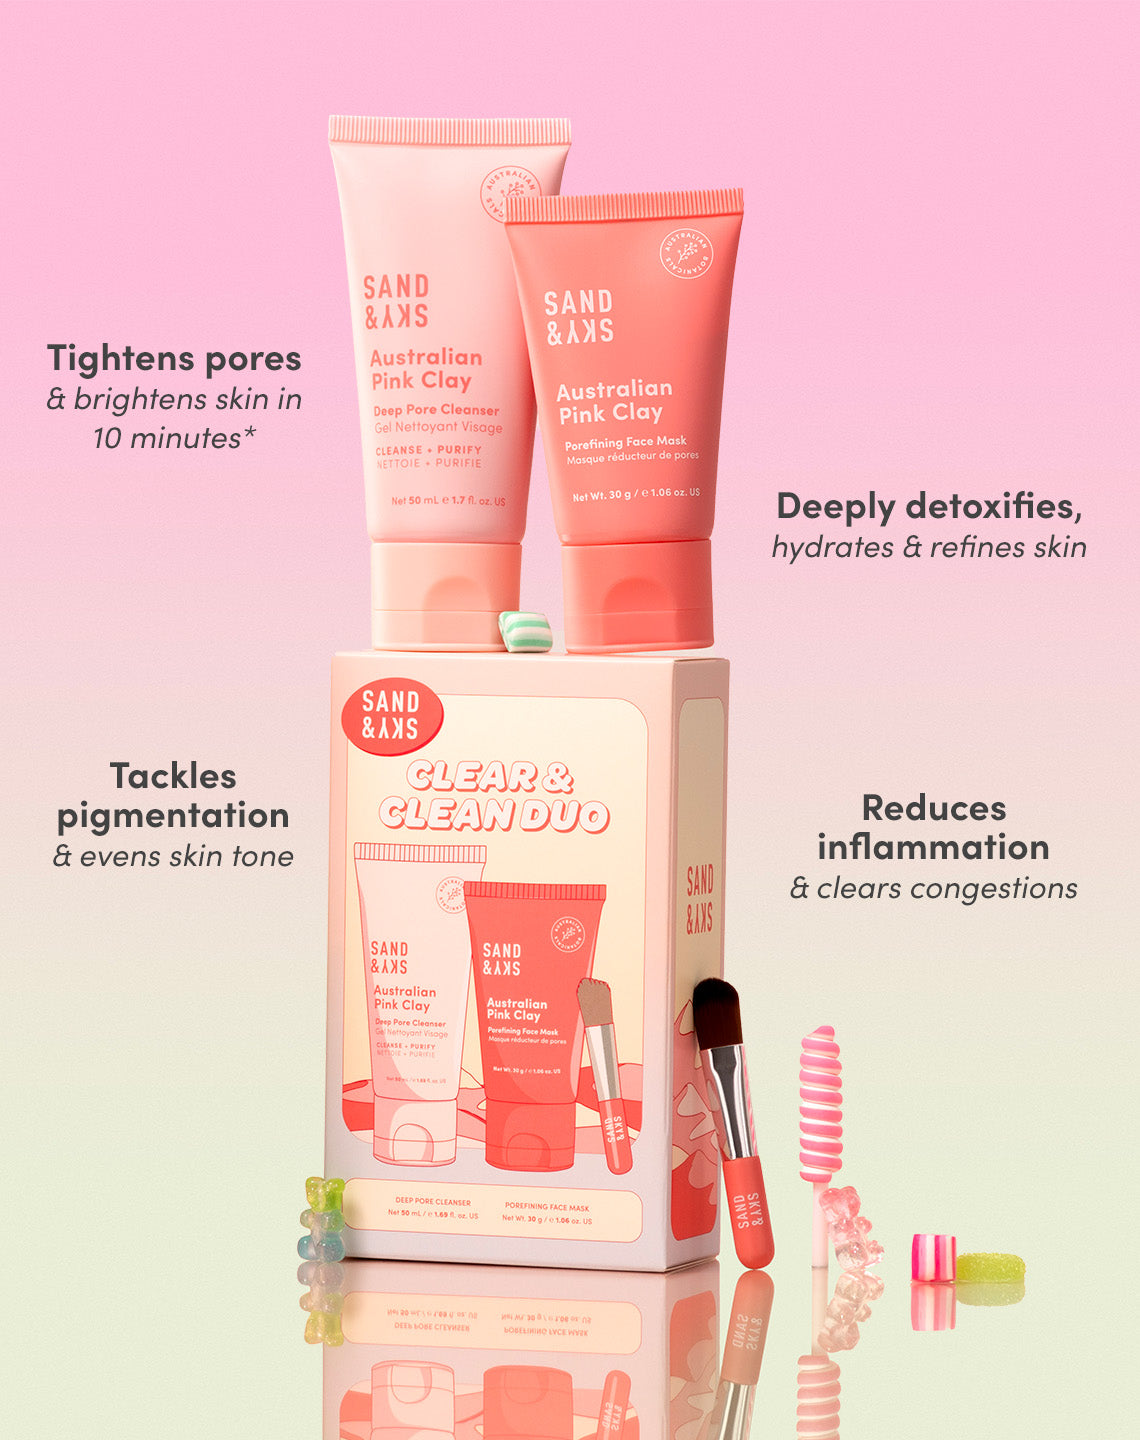 Clean & Clear Duo Kit Limited Edition Holiday Set